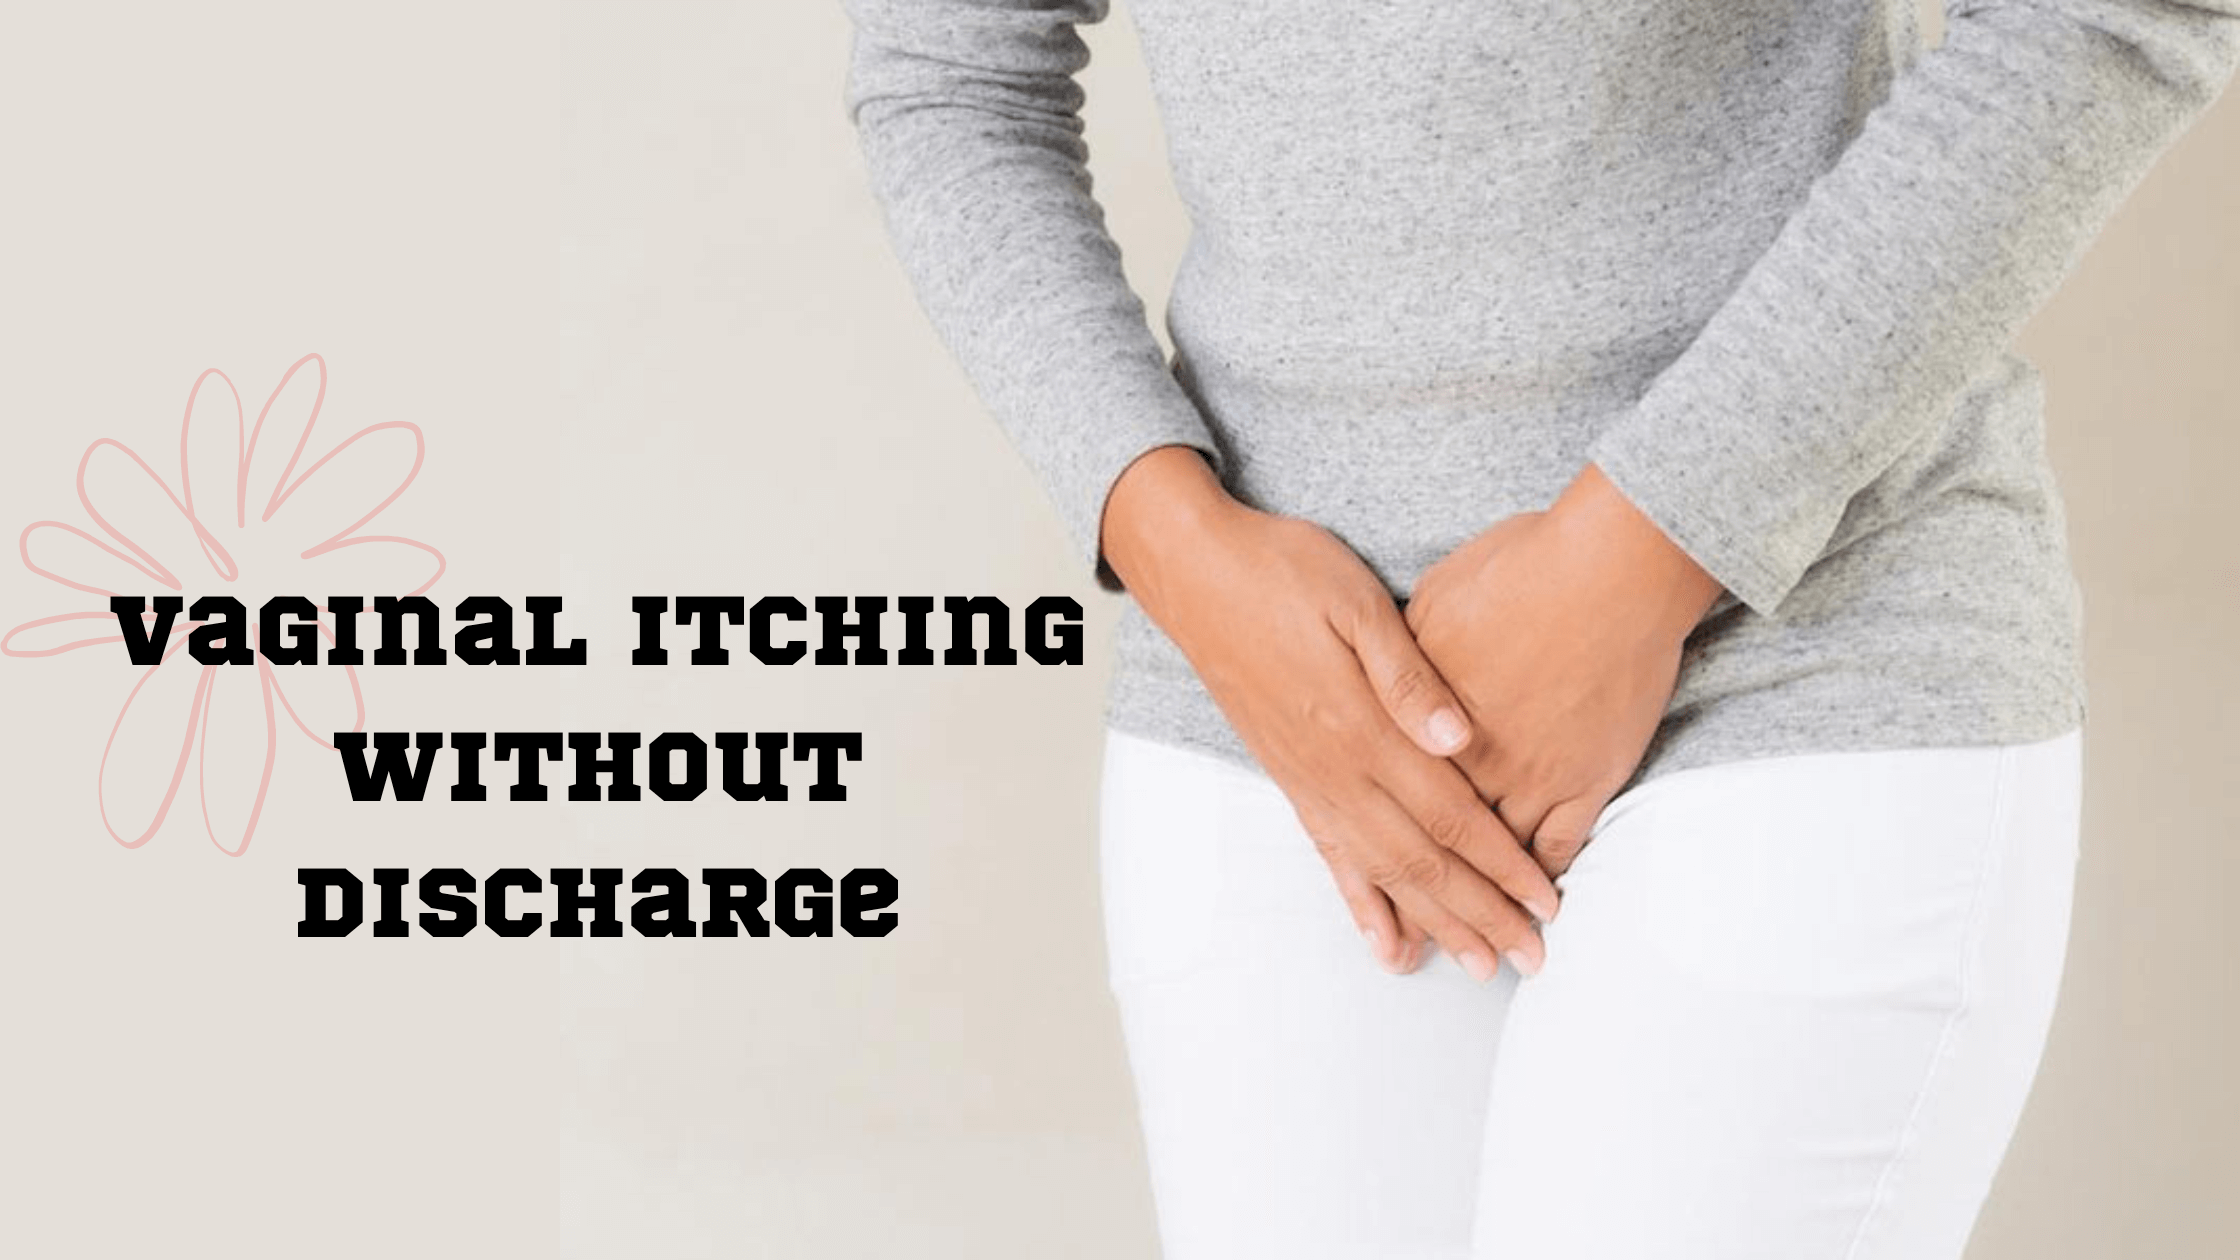 Vaginal Itching Without Discharge